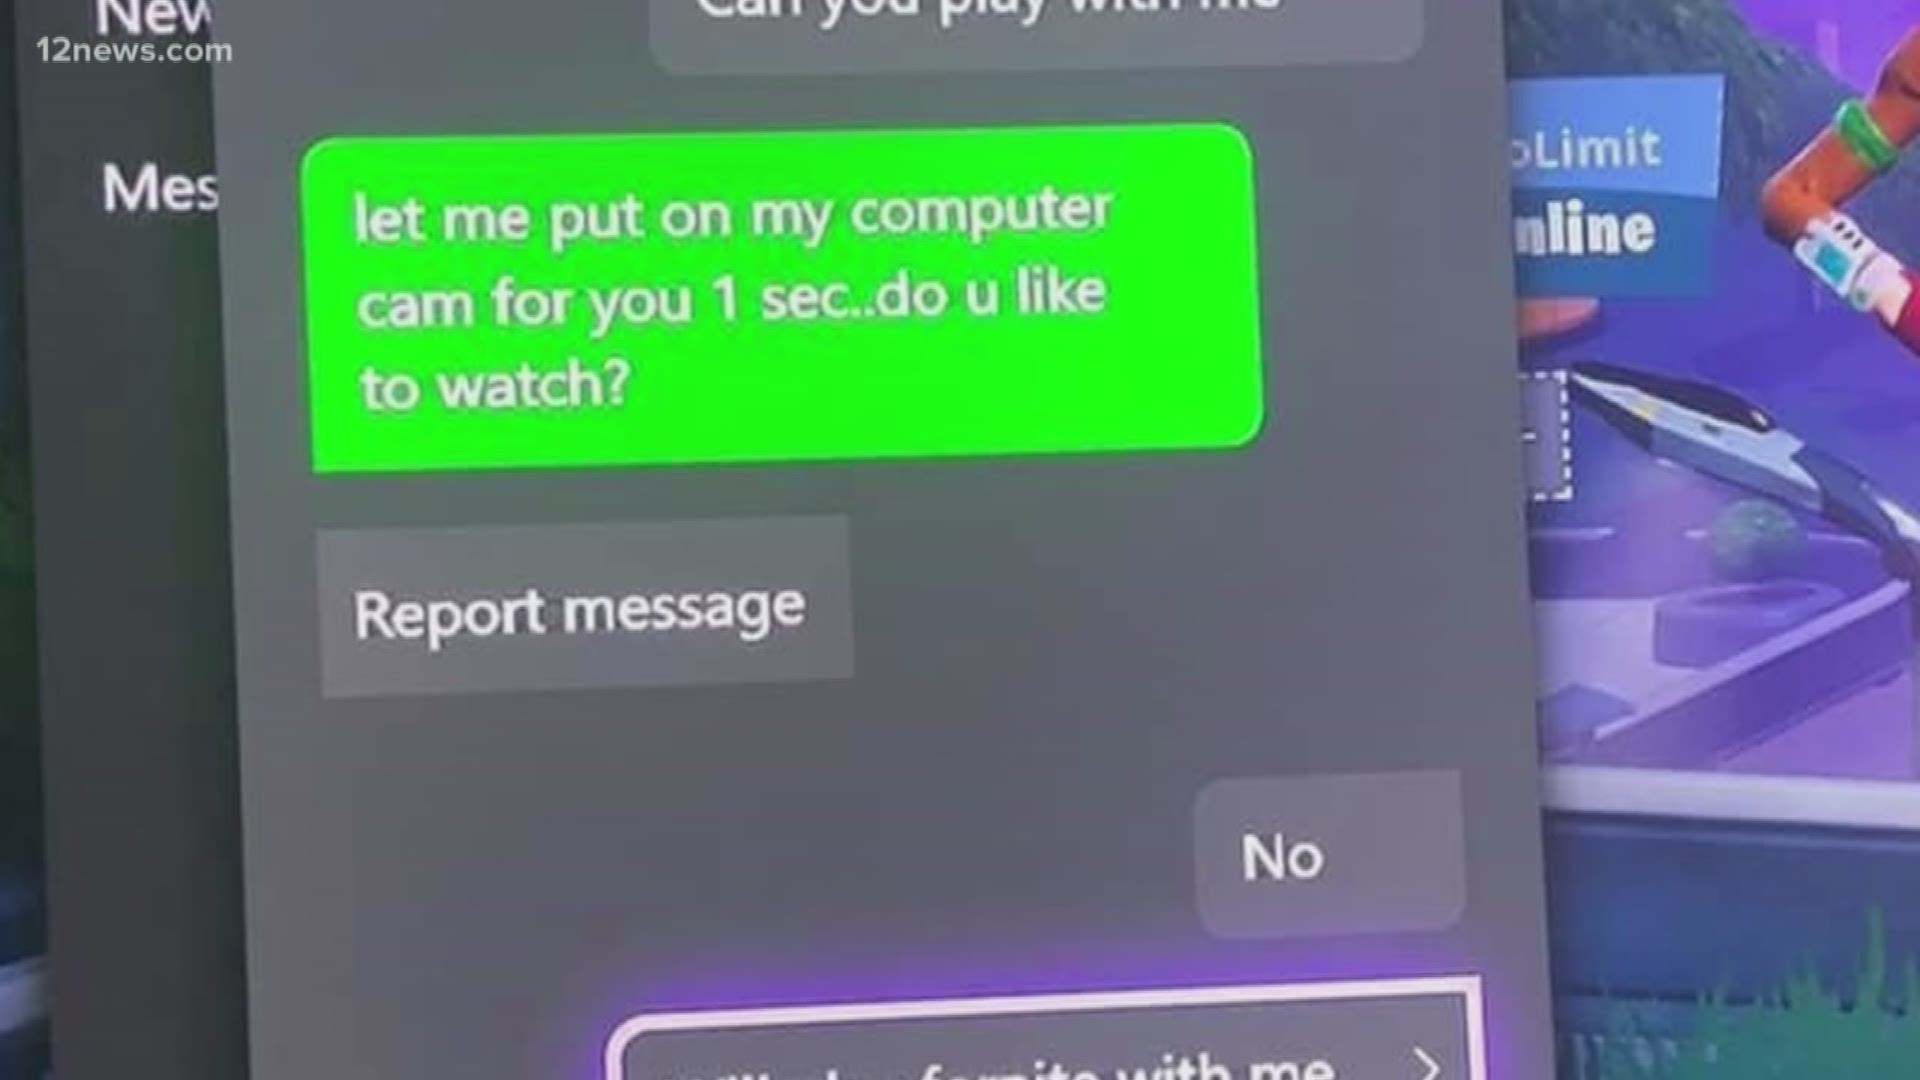 A Scottsdale police officer has a warning for parents after a creeper sent a malicious message to the officer's own 11-year-old son while the boy was playing Fortnite.